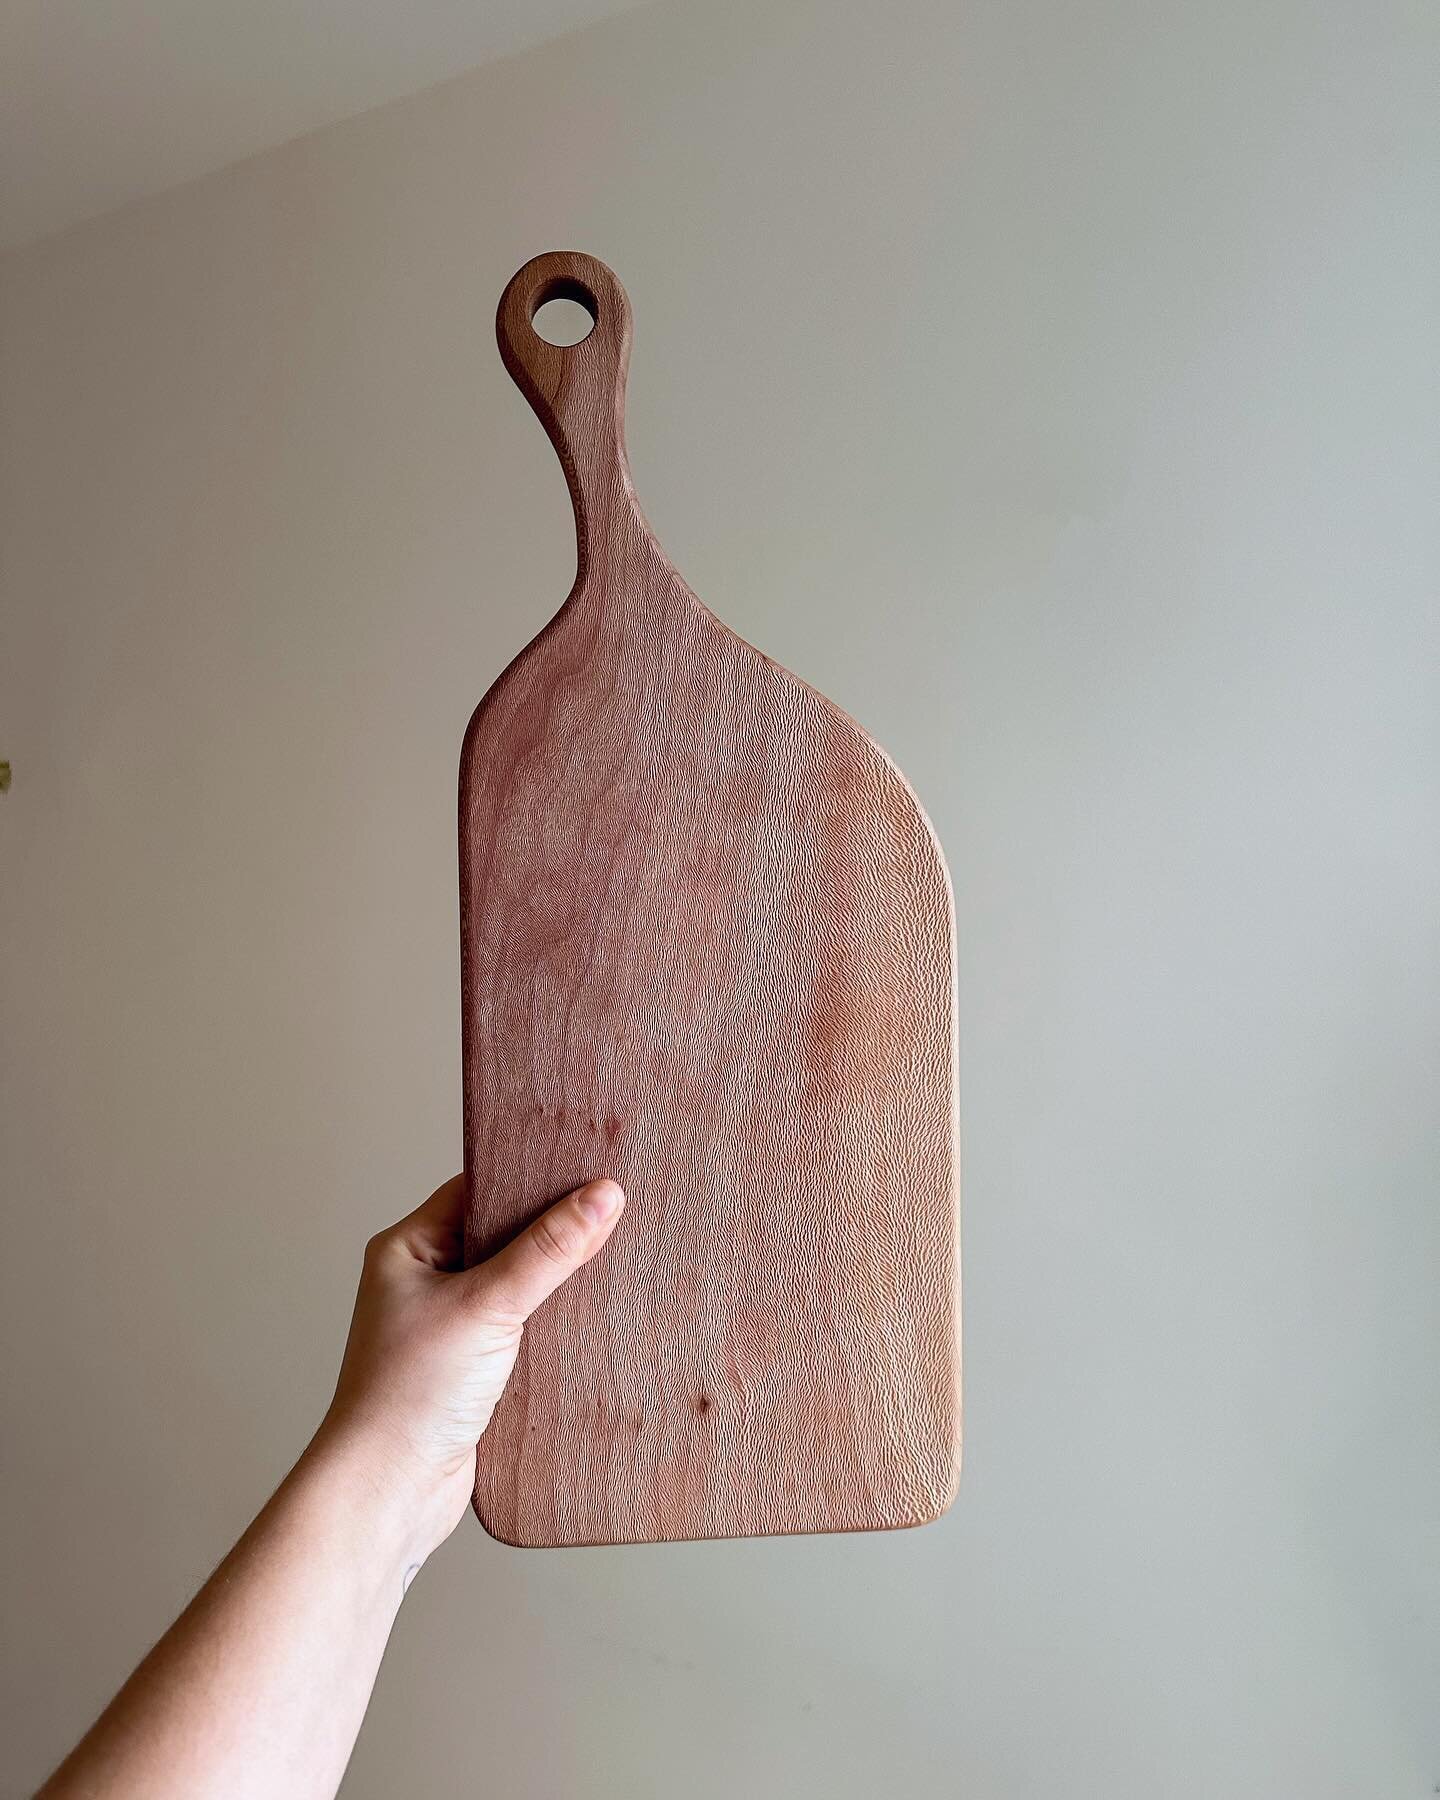 These boards are now available to purchase in our webshop! London Plane, Ash and Sycamore. Please be aware that all shop orders made now will be processed on Jan 8th after our holiday. Merry Christmas everyone!